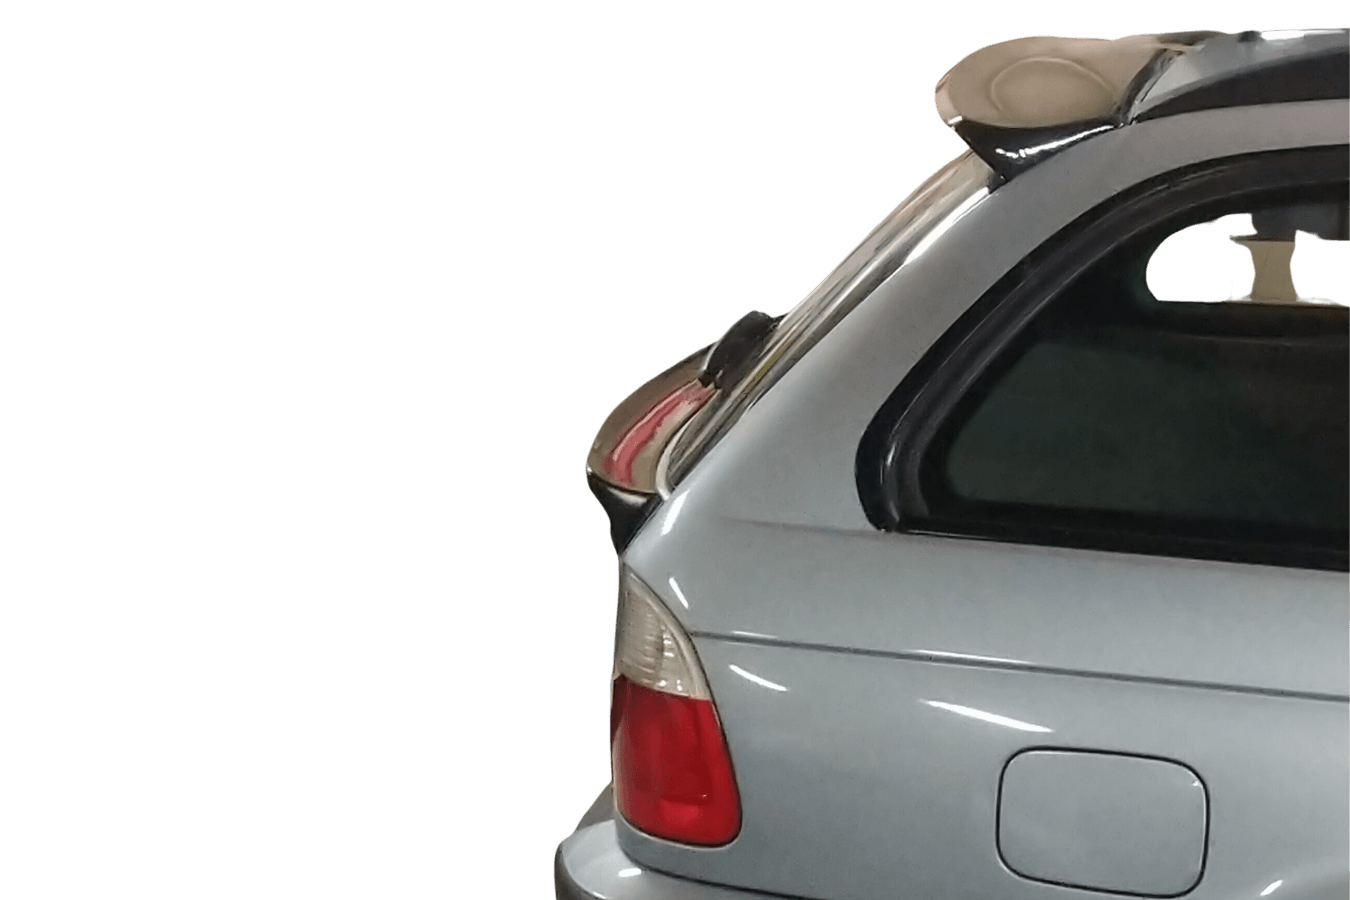 BMW E46 (Touring) Series 3 High Gloss Roof and Trunk Duck Tail Spoiler (1999 - 2005) - K2 Industries